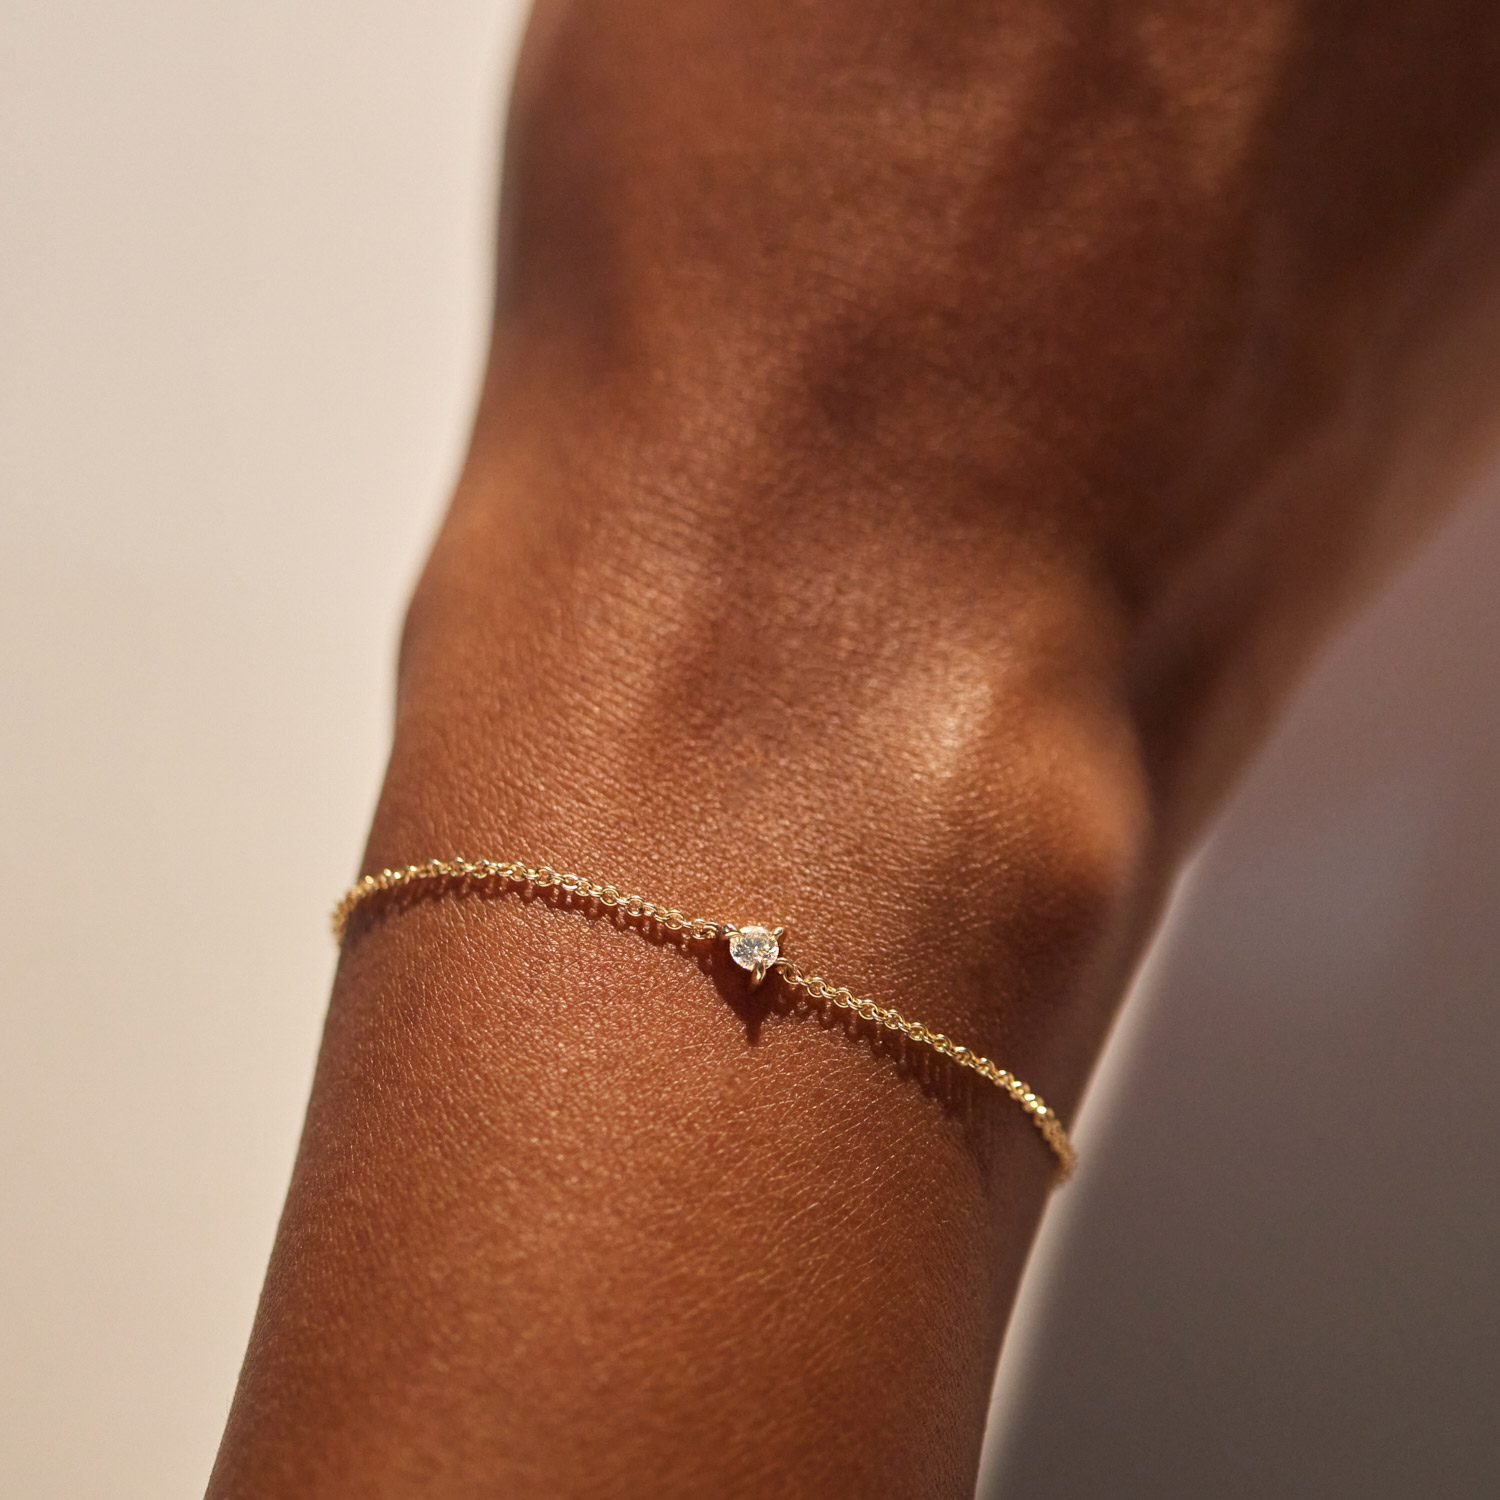 Permanent Jewelry: Everything You Need to Know About the Forever